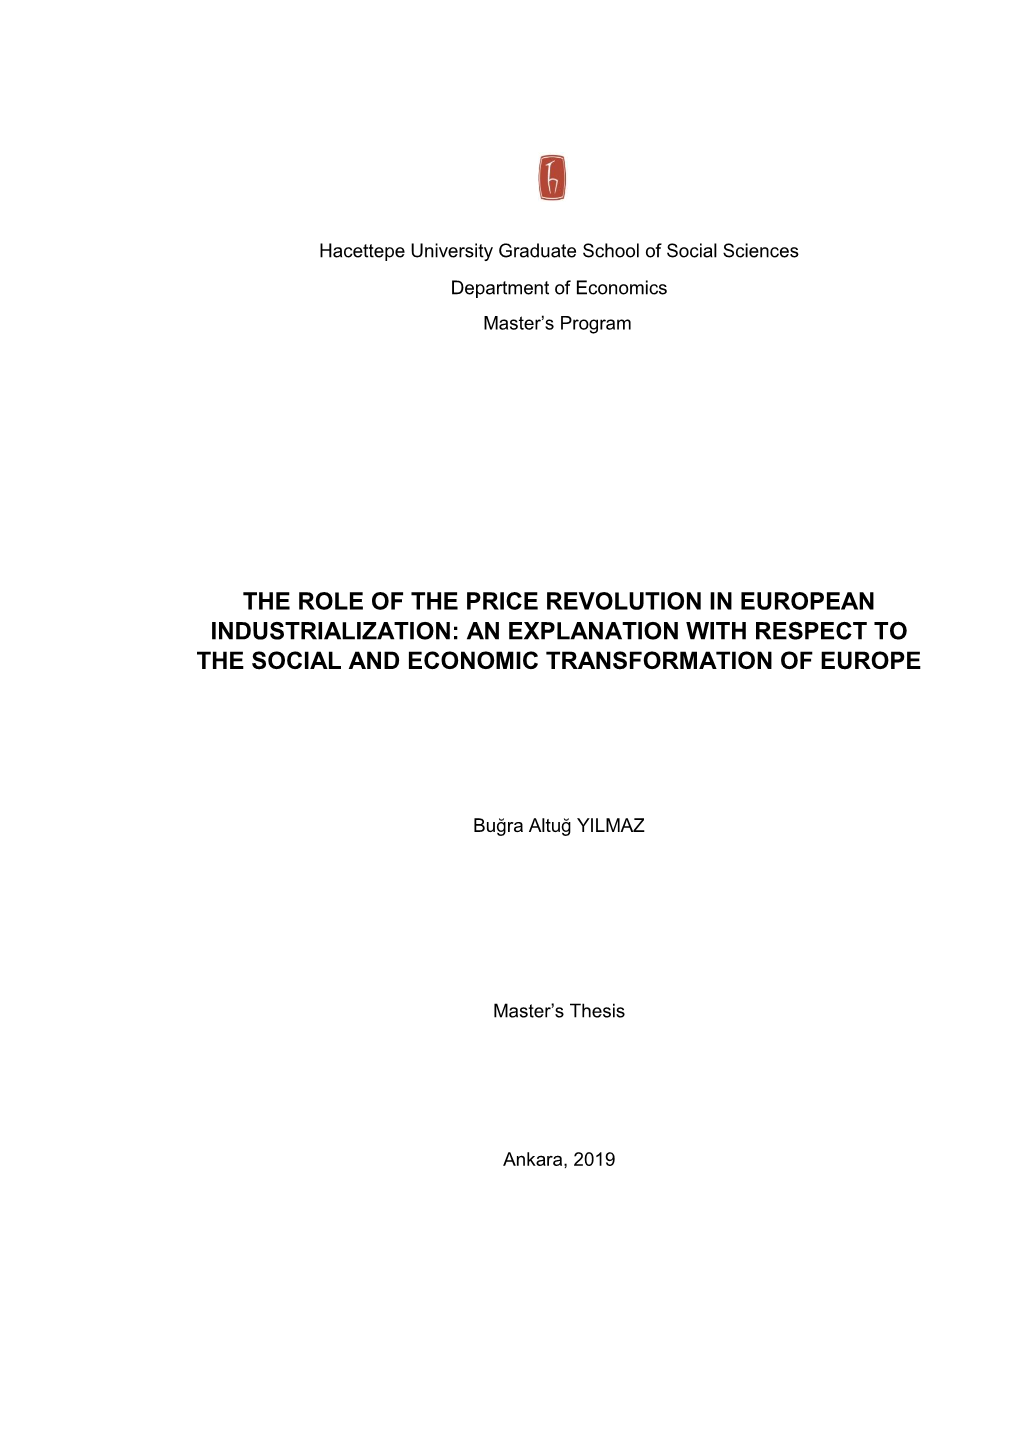 The Role of the Price Revolution in European Industrialization: an Explanation with Respect to the Social and Economic Transformation of Europe